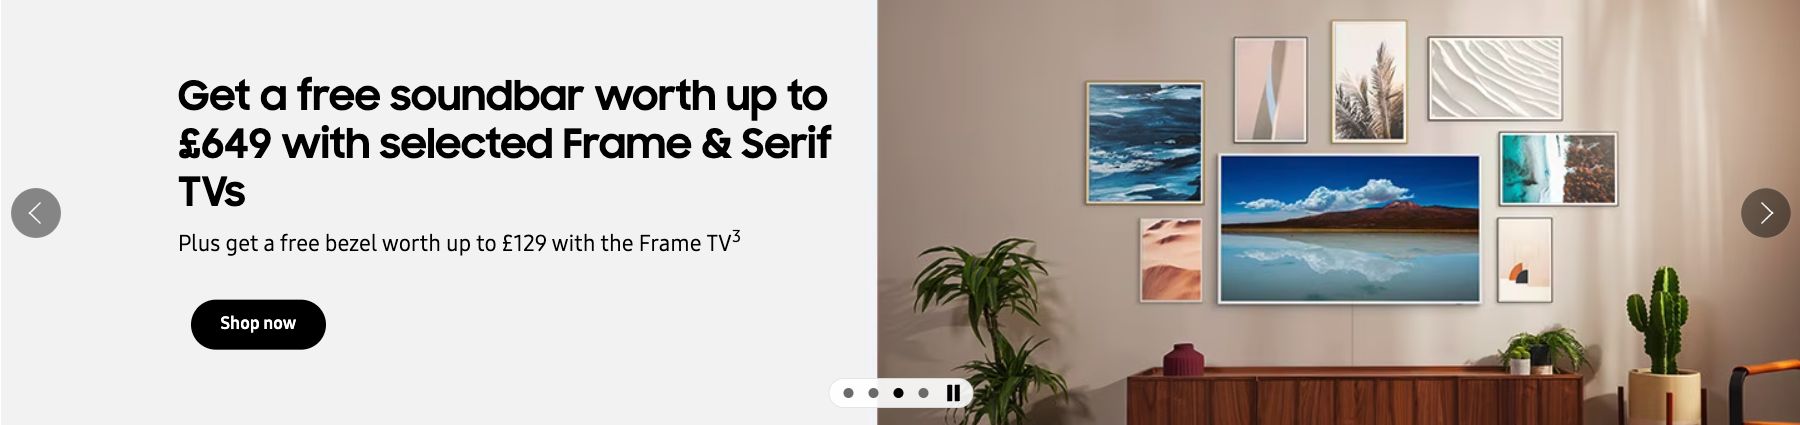 Free Samsung S50B Soundbar With Samsung The Frame And Samsung The Serif TVs In The UK